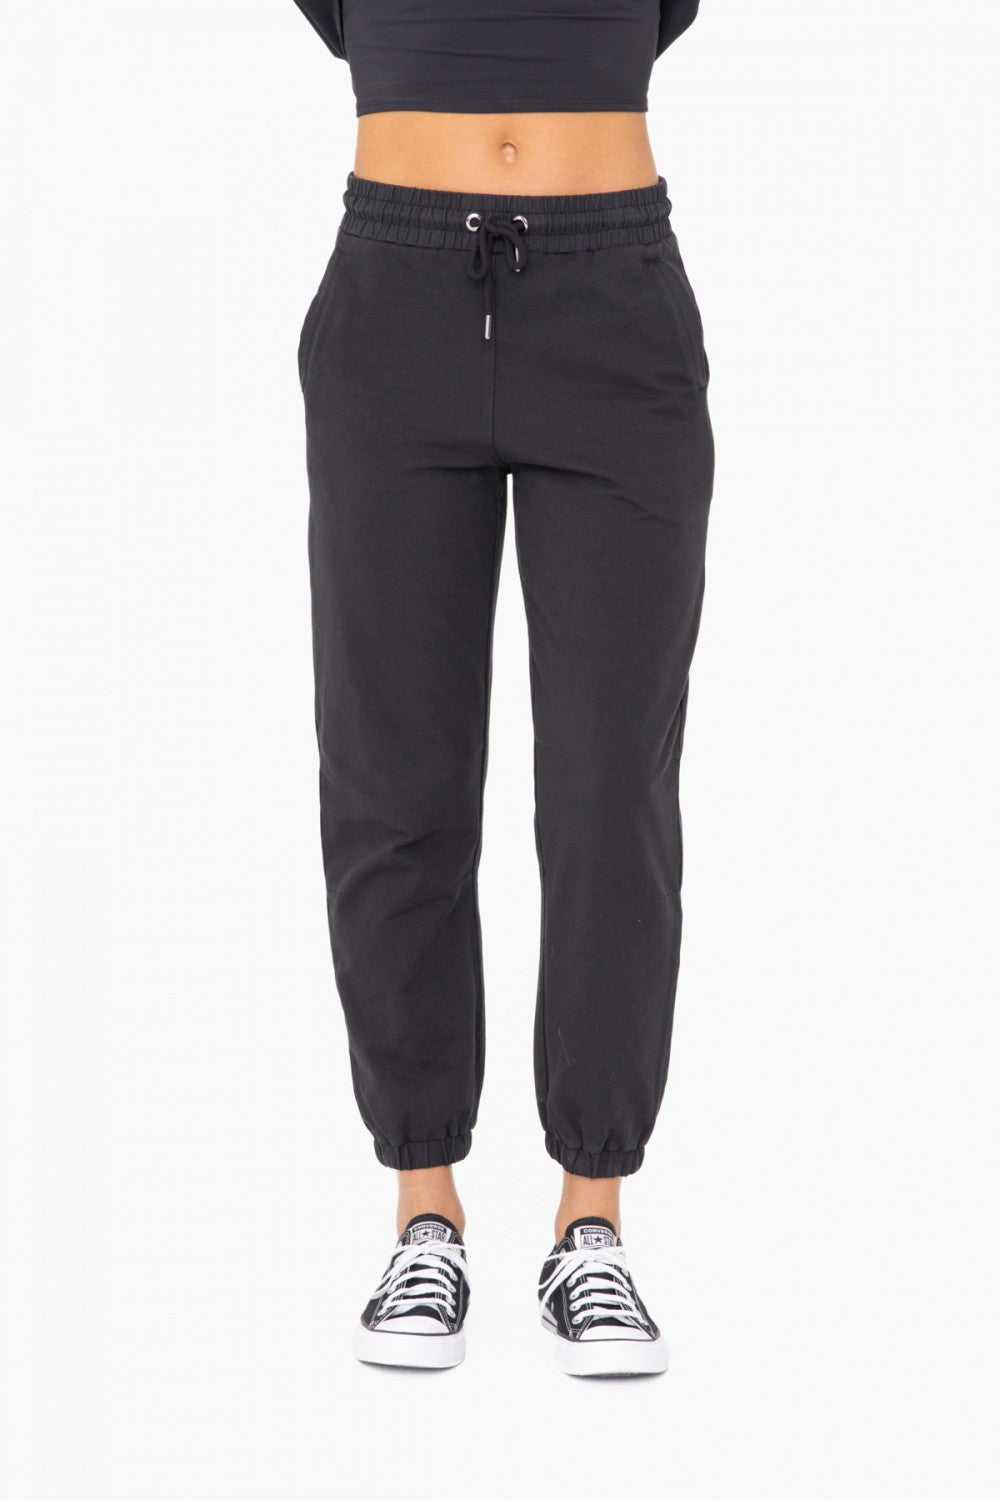 Swoop Back Twill Joggers - KP-A1109